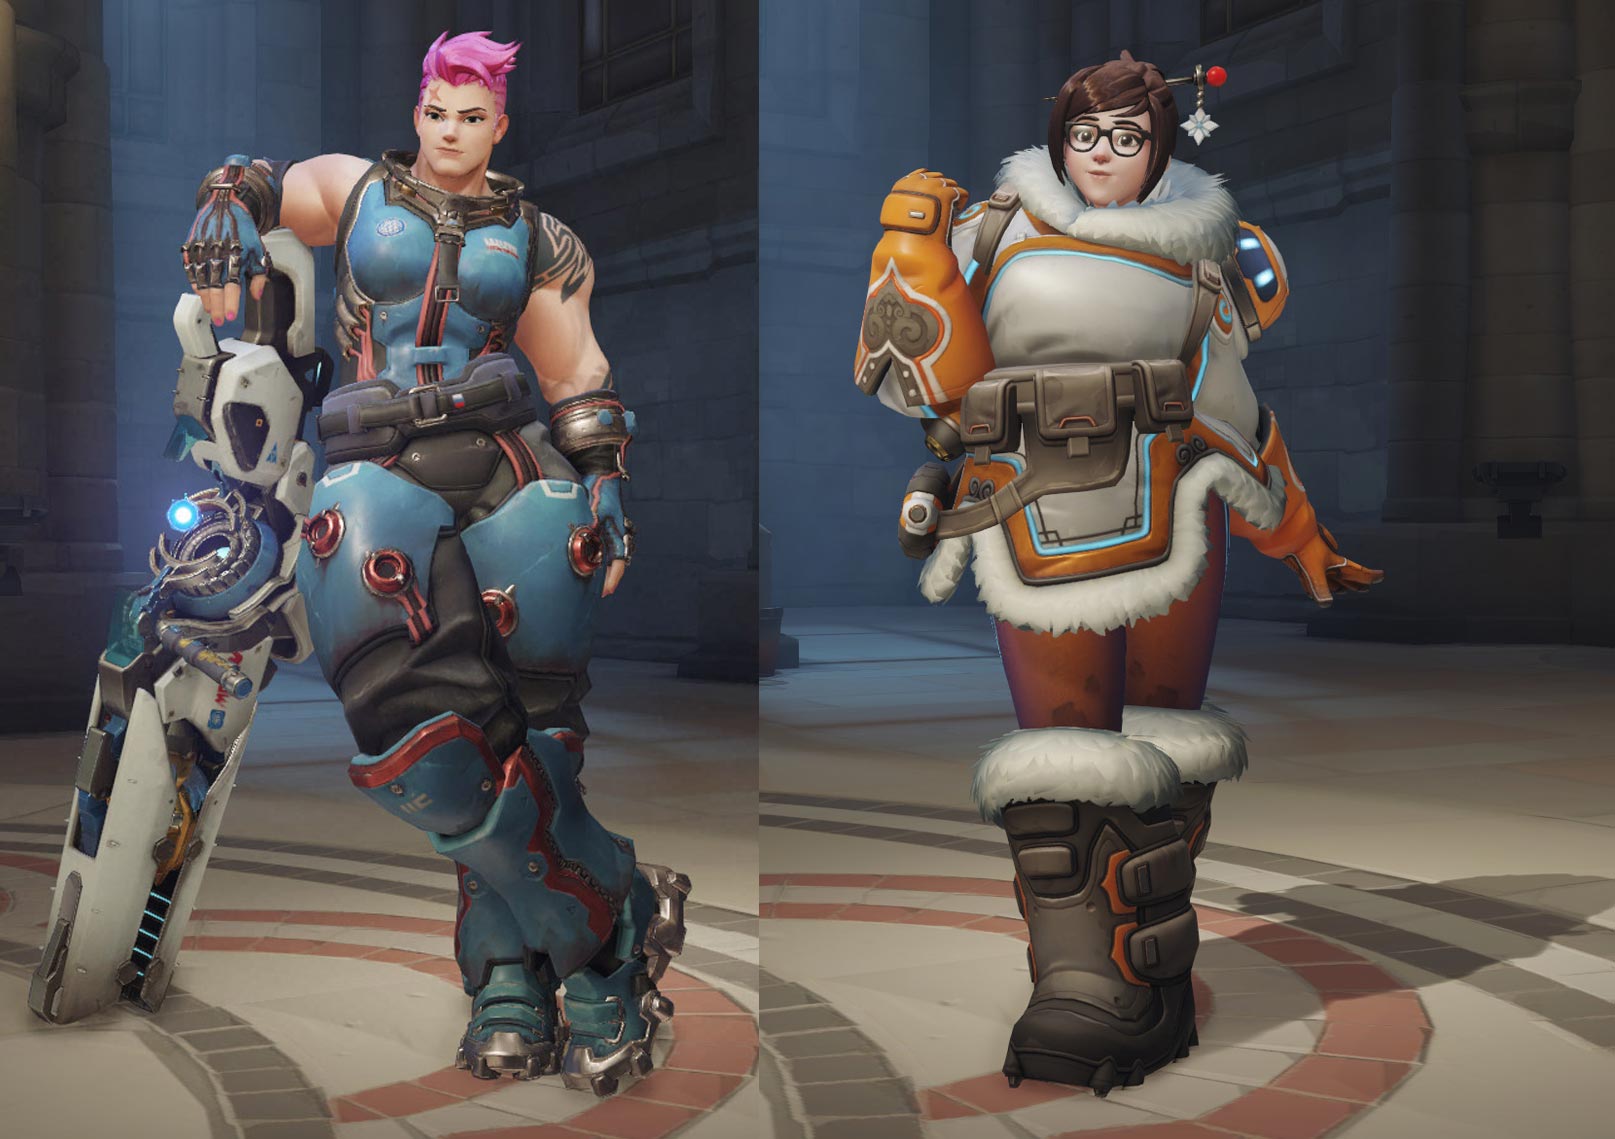 Thin Ectomorphs Given Makeovers to Look Like Average Endomorphs (Zarya and Mei)